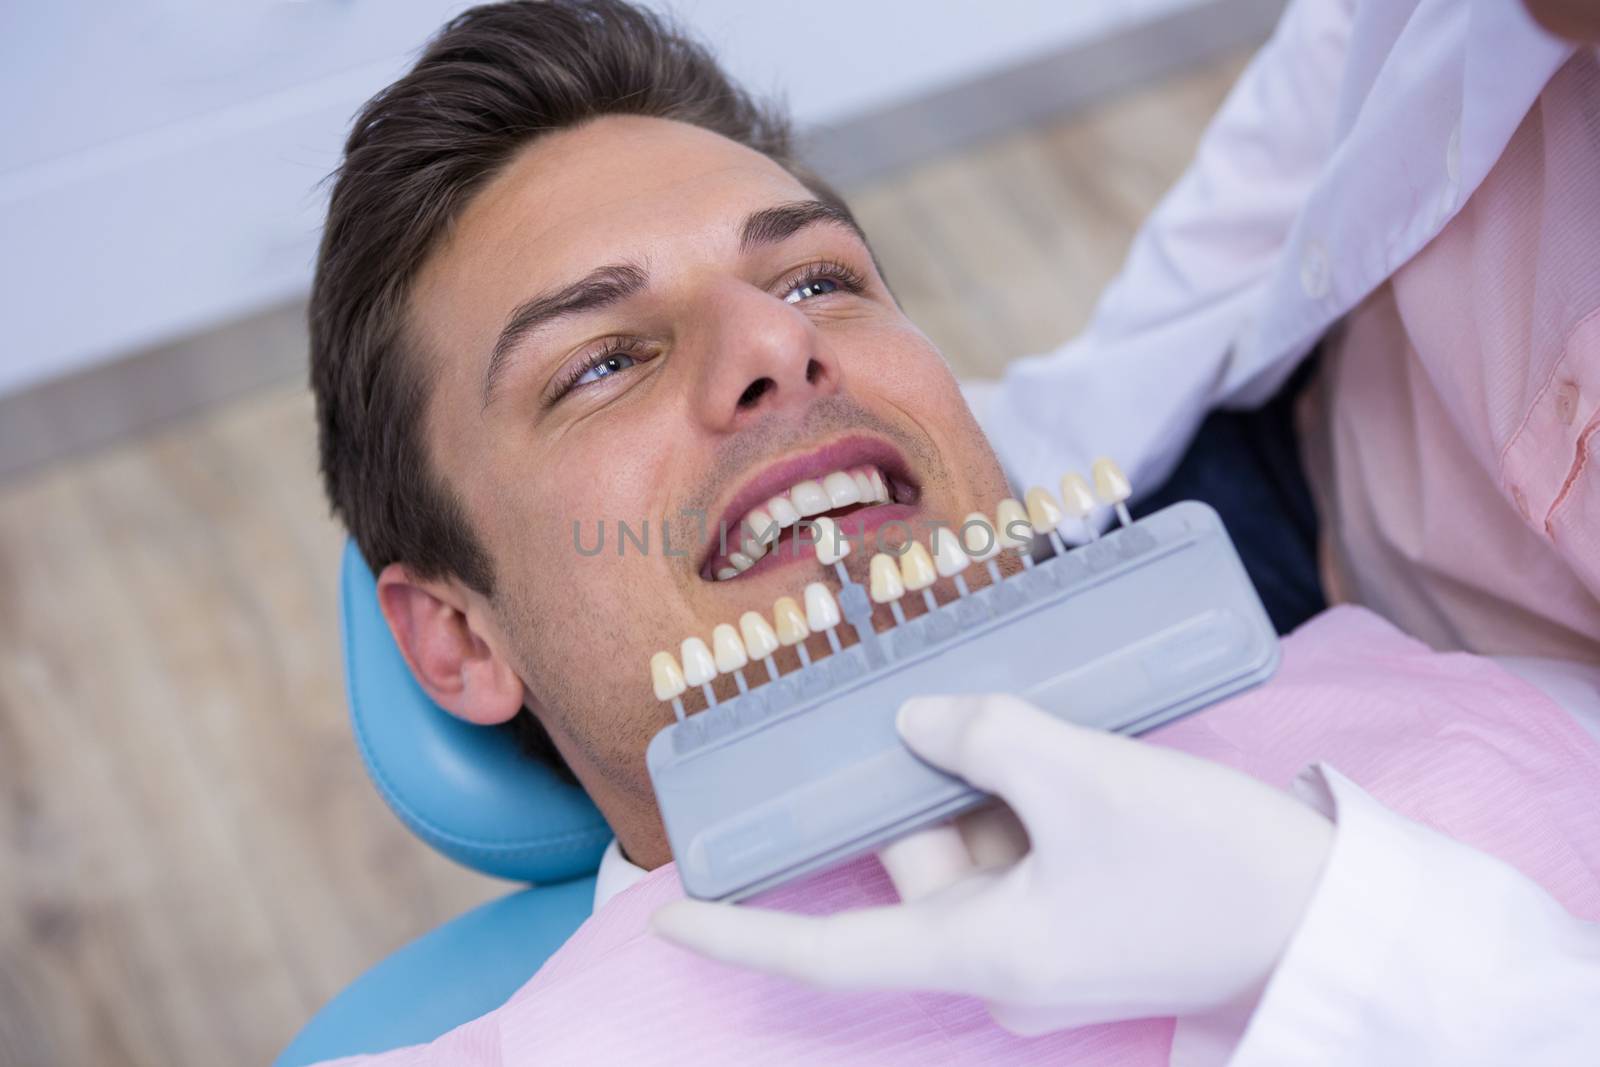 Dentist holding equipment while examining man at medical clinic by Wavebreakmedia